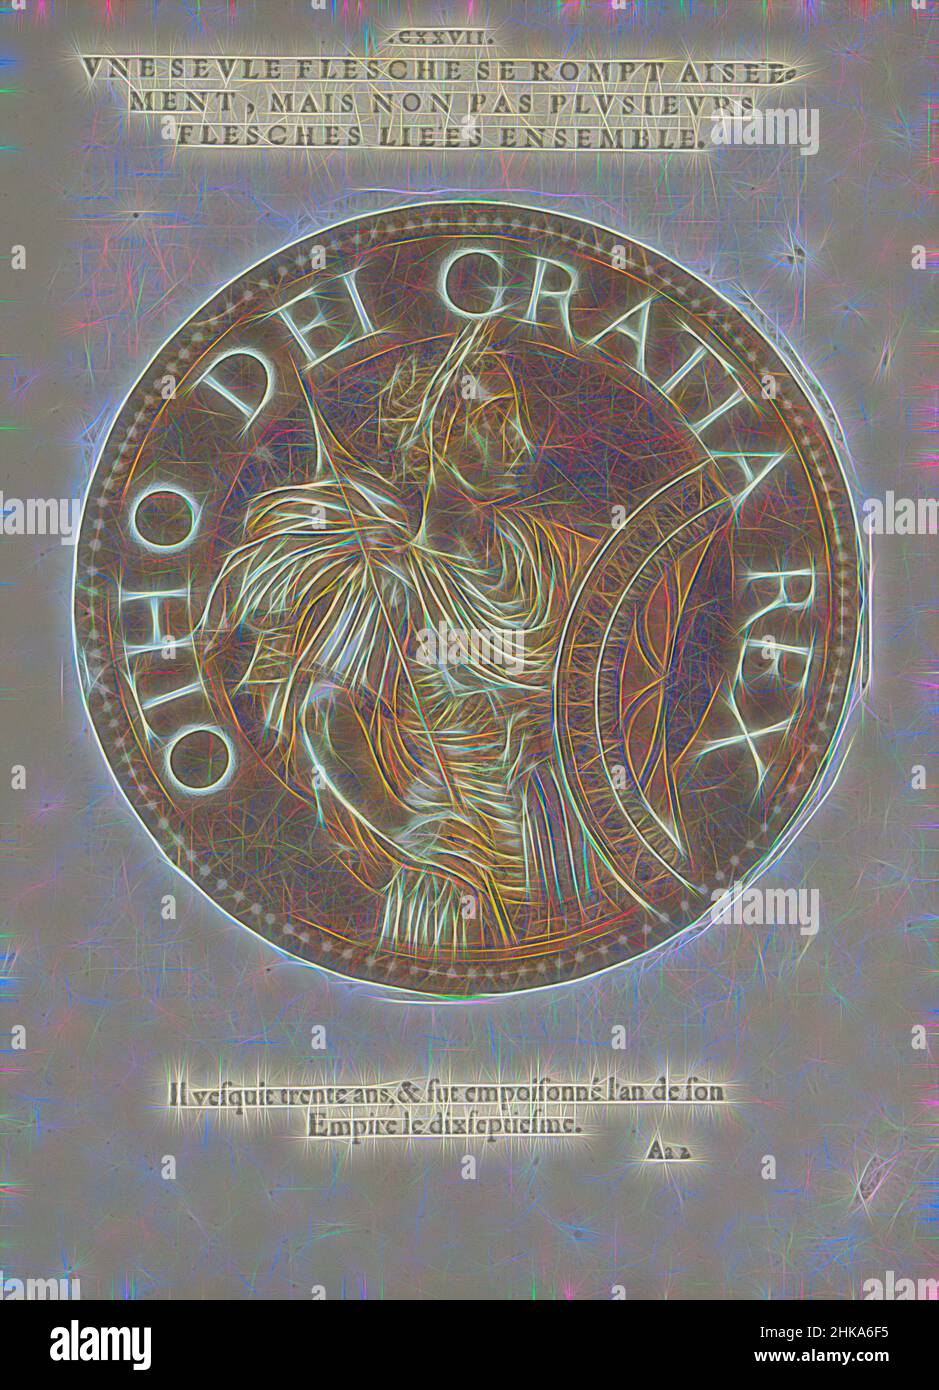 Inspired by Portrait of Emperor Otto IIILes images presque de tous les empereurs, Portrait of Emperor Otto III, on a coin with edge lettering. The print is part of a book on the emperors from Julius Caesar to Charles V and his brother Ferdinand., Joos Gietleughen, print maker: Hubert Goltzius, Reimagined by Artotop. Classic art reinvented with a modern twist. Design of warm cheerful glowing of brightness and light ray radiance. Photography inspired by surrealism and futurism, embracing dynamic energy of modern technology, movement, speed and revolutionize culture Stock Photo